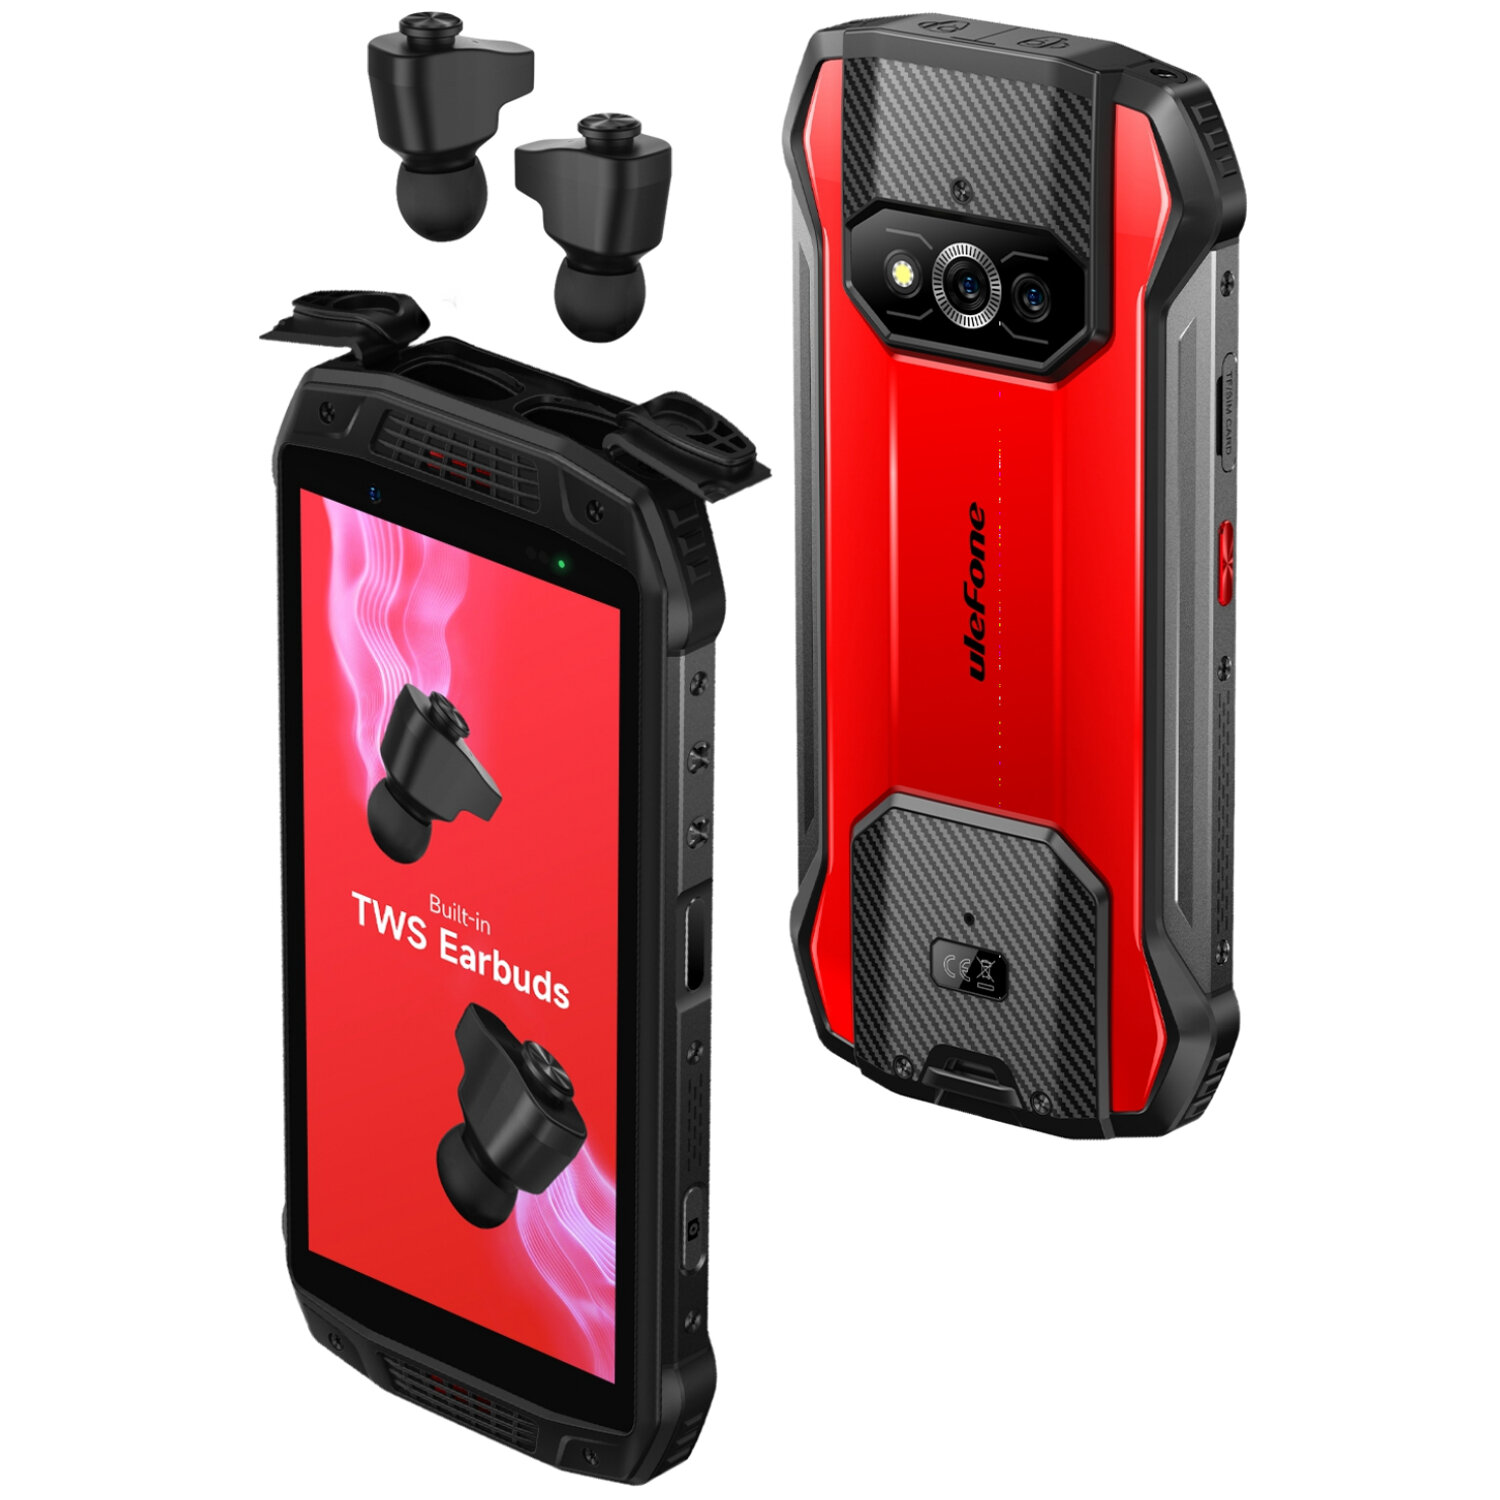 Image of Ulefone Armor 15 Built-in TWS Earbuds Helio G35 6GB 128GB 545 inch 60Hz Refresh Rate Dual Speakers NFC 6600mAh Android